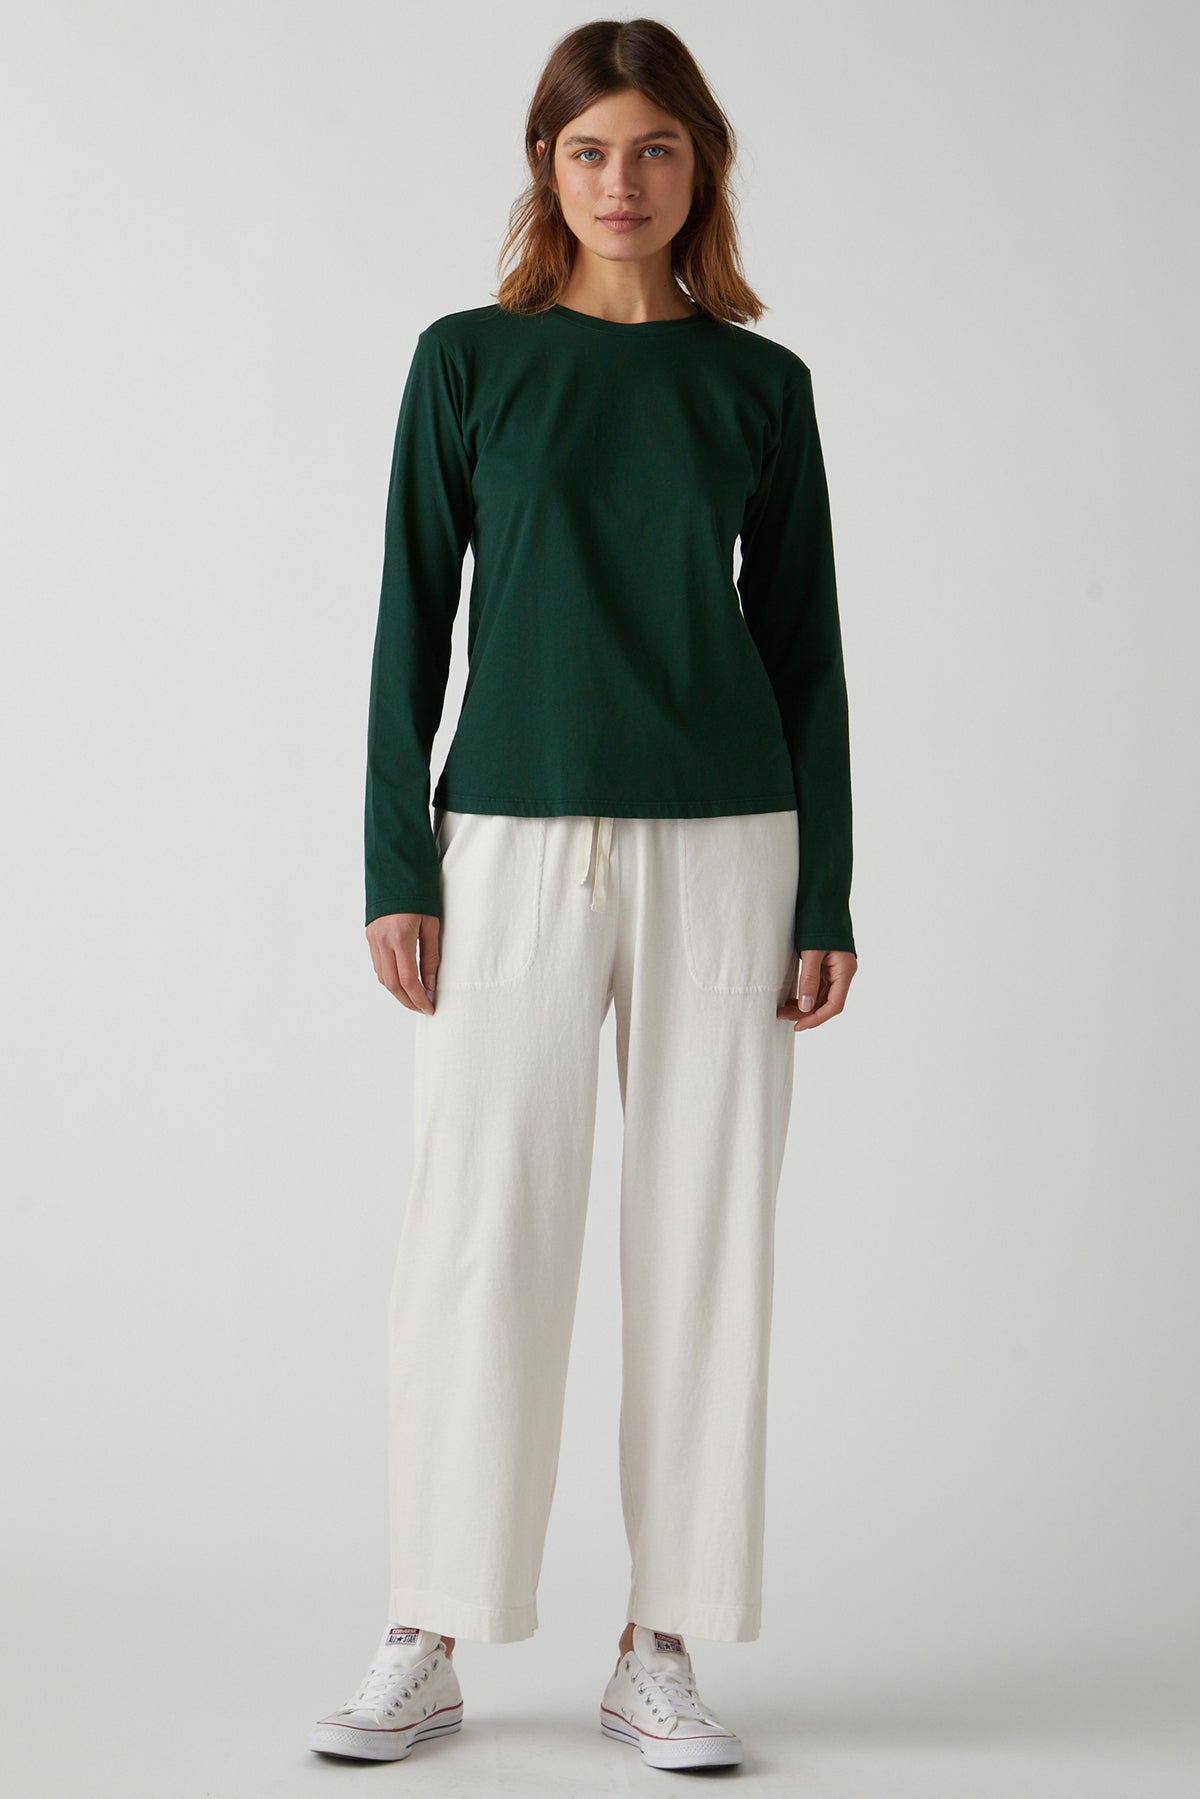   Vicente Tee in forest green with Pismo Pant in beach full length front 